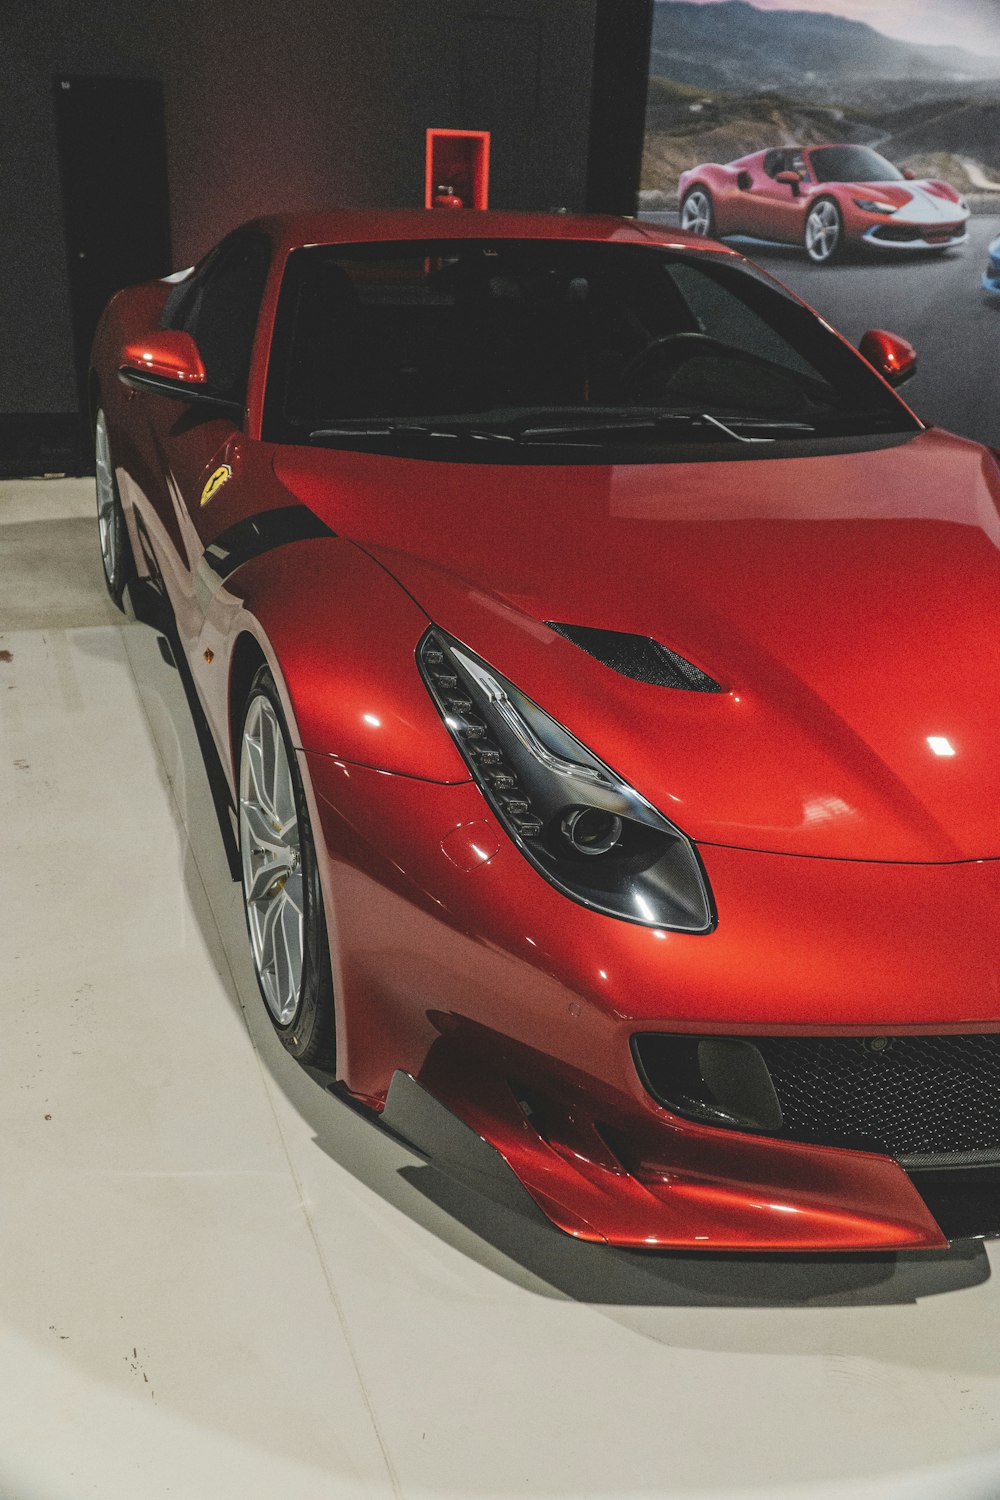 a red sports car on display in a showroom